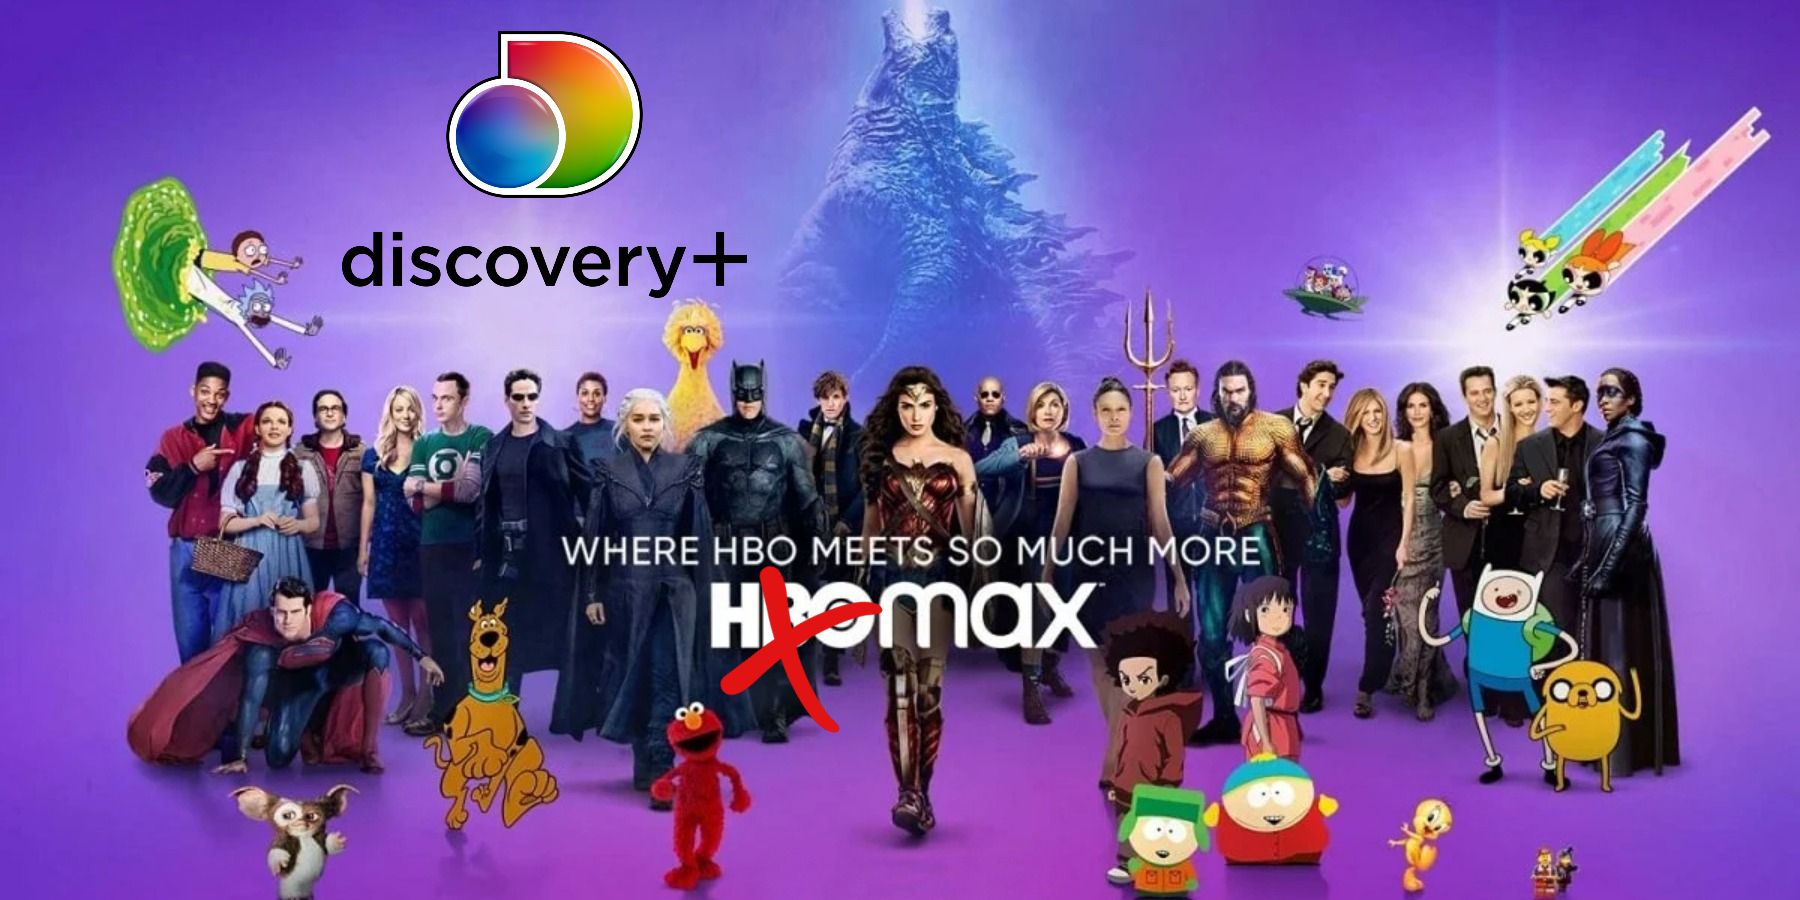 HBO Max promo image with HBO crossed out and Discovery Plus logo